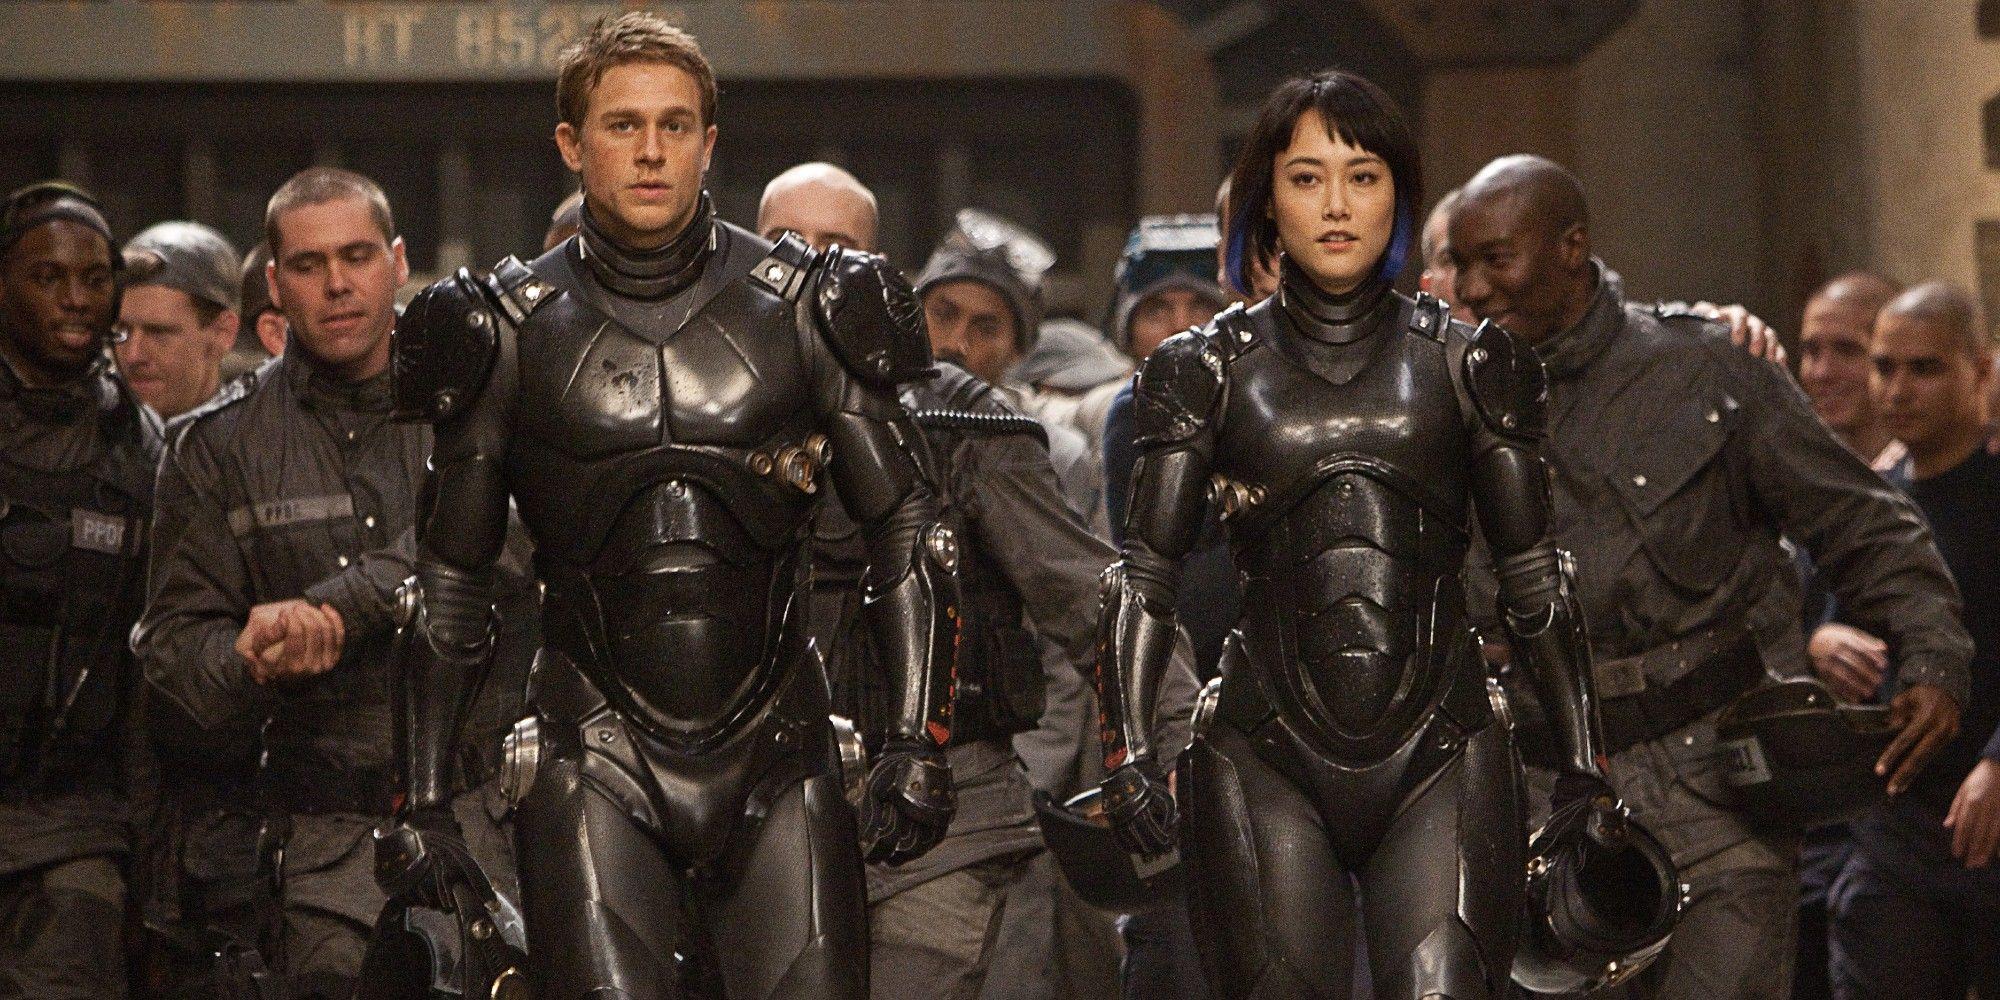 The cast of Pacific Rim, led by Charlie Hunnam and Rinko Kikuchi